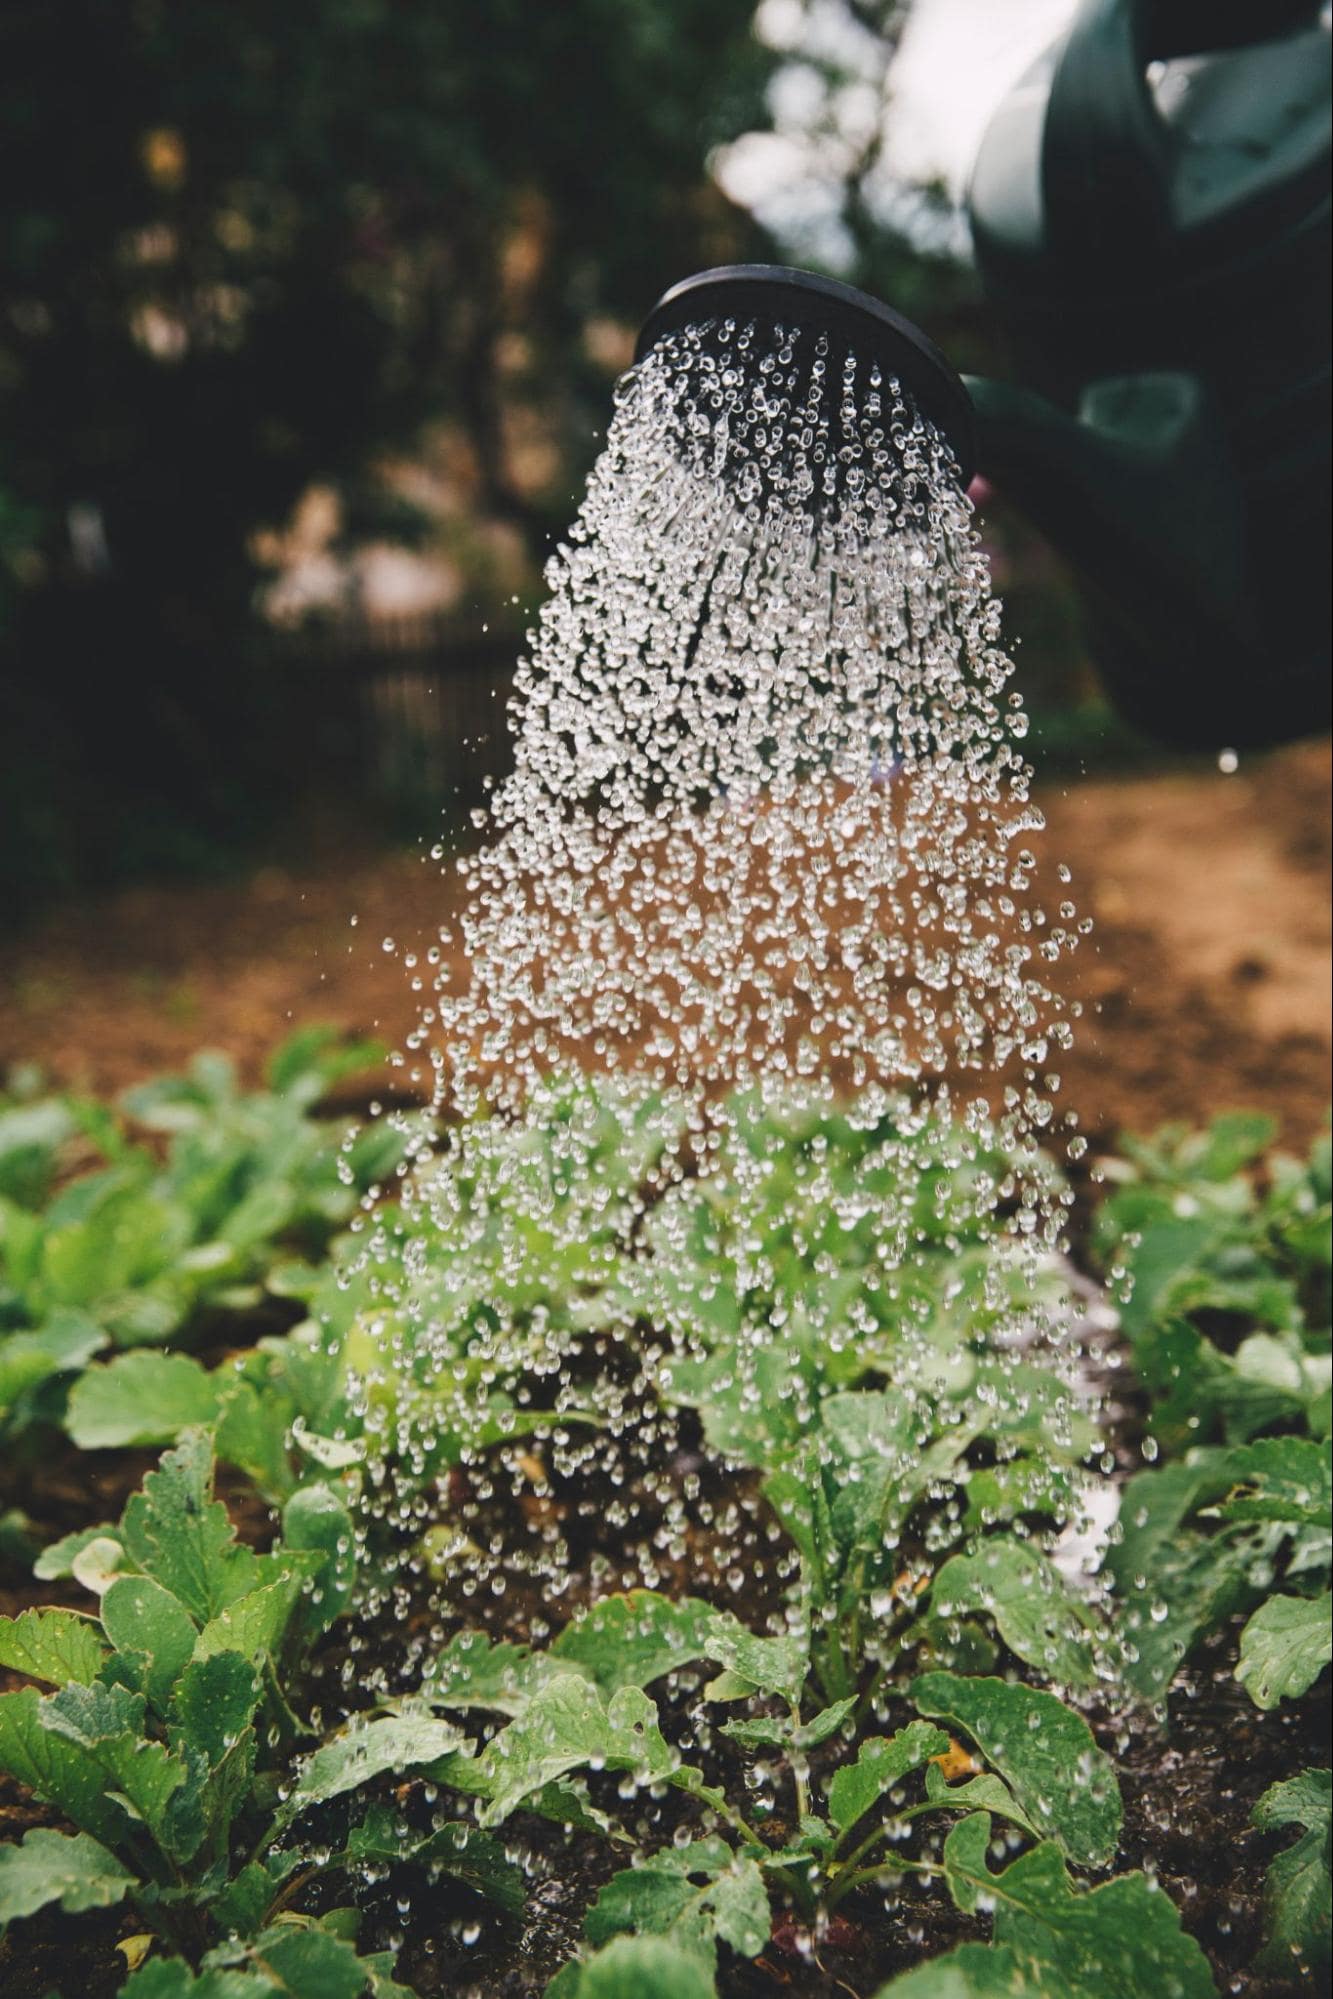 Image of plants being watered